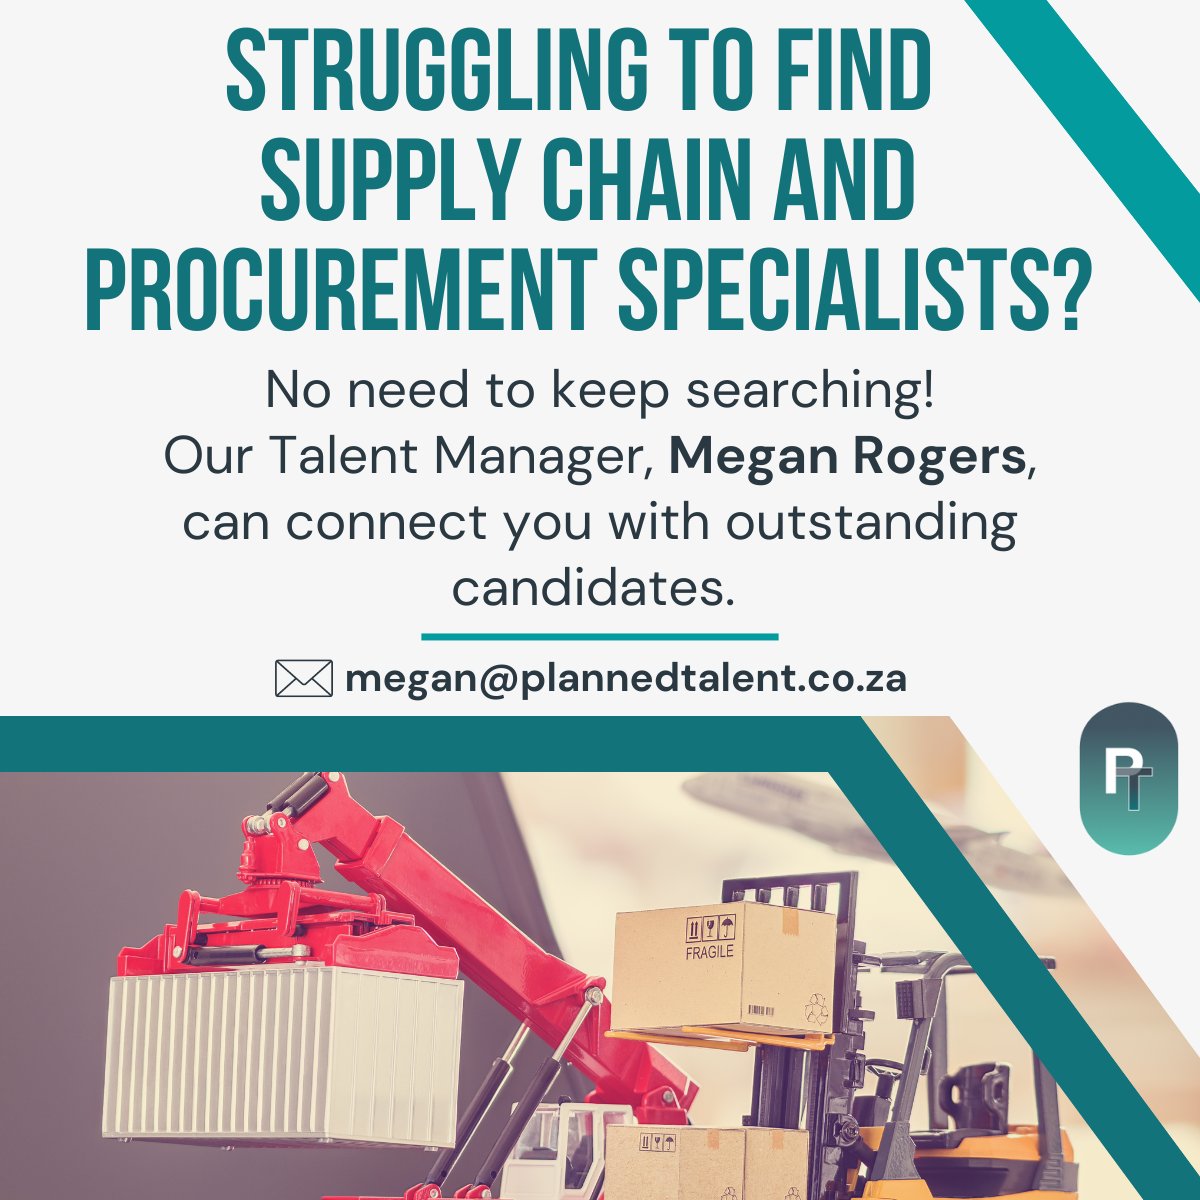 Feel free to reach out to Megan Rogers if you're looking to acquire exceptional talent.
#letsplantogether #supplychainjobs #procurementjobs